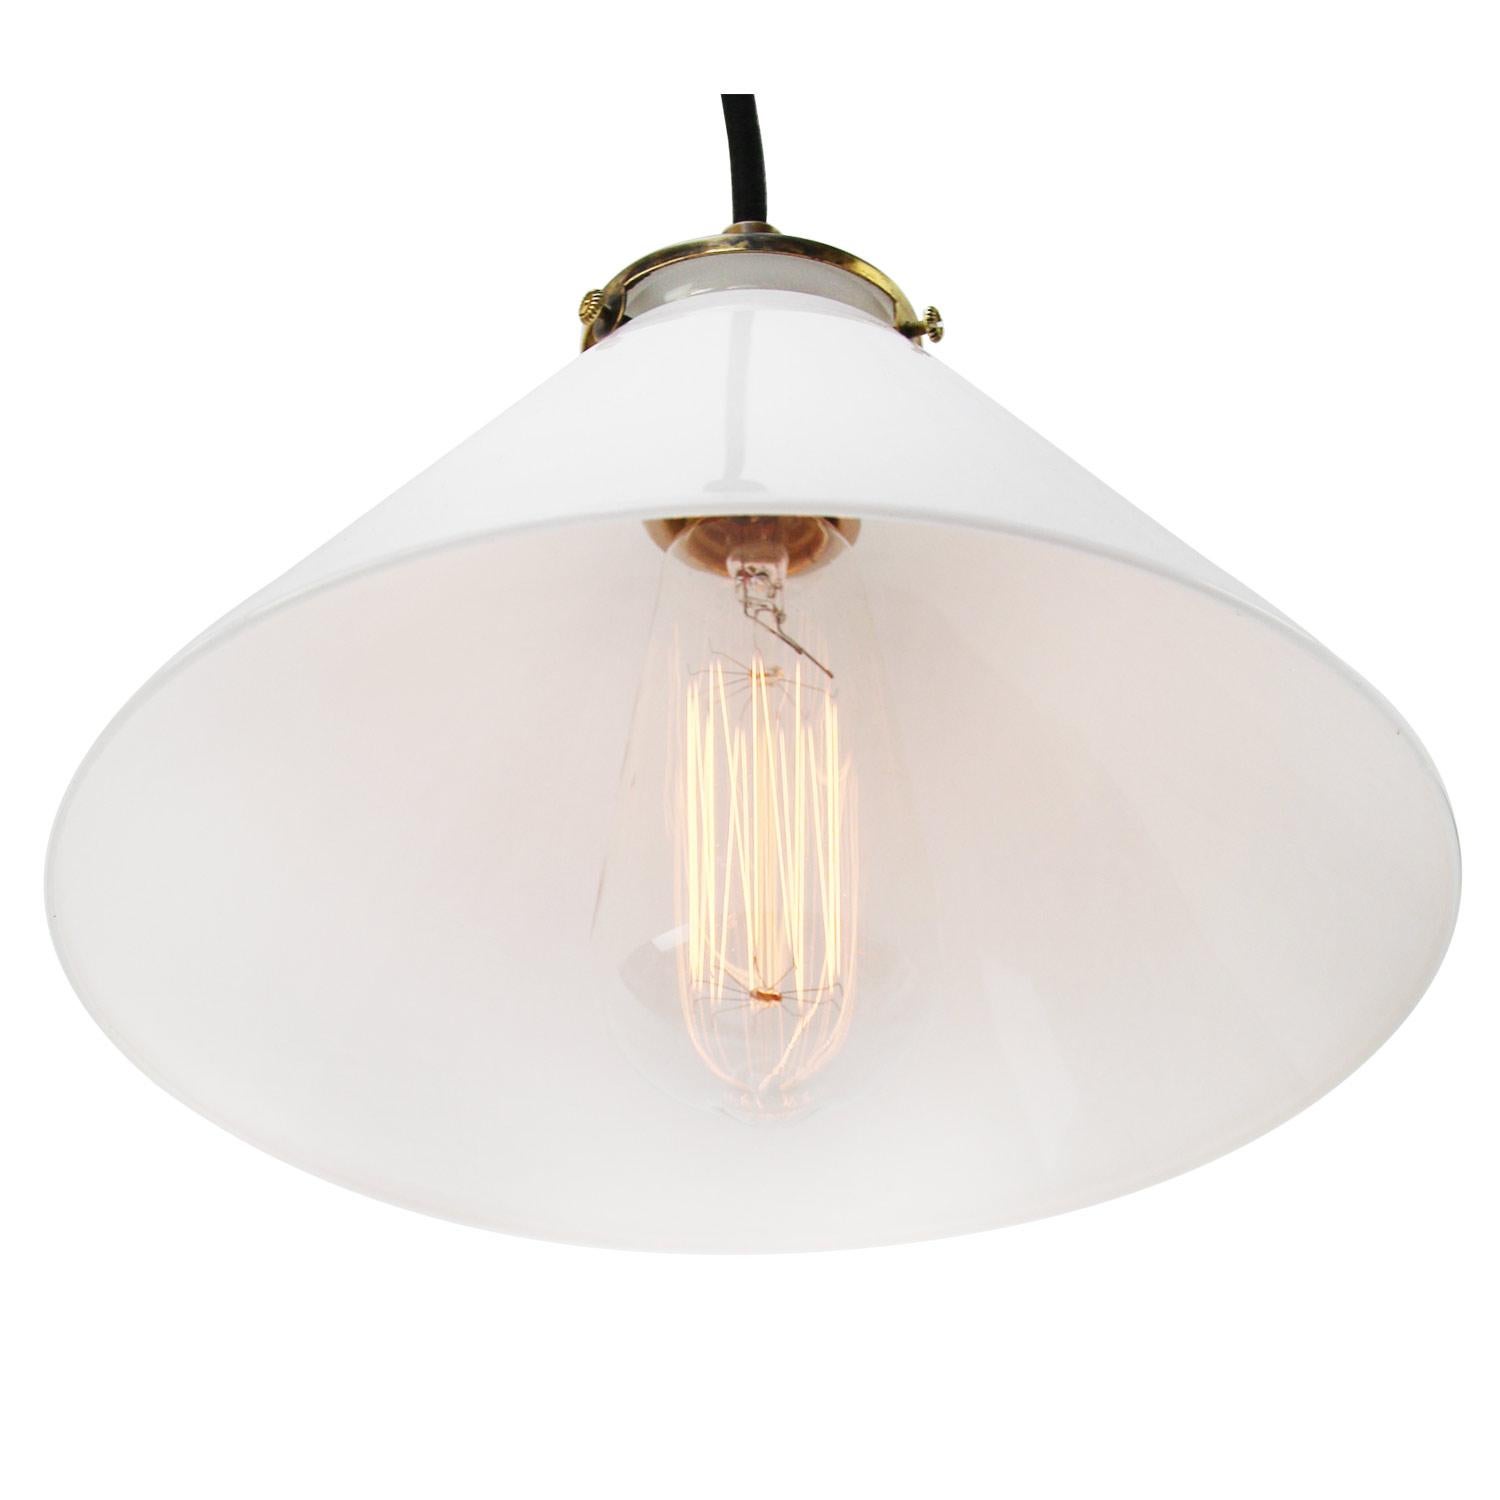 French opaline glass industrial pendant. 

Measure: Weight 1.0 kg / 2.2 lb

Priced per individual item. All lamps have been made suitable by international standards for incandescent light bulbs, energy-efficient and LED bulbs. E26/E27 bulb